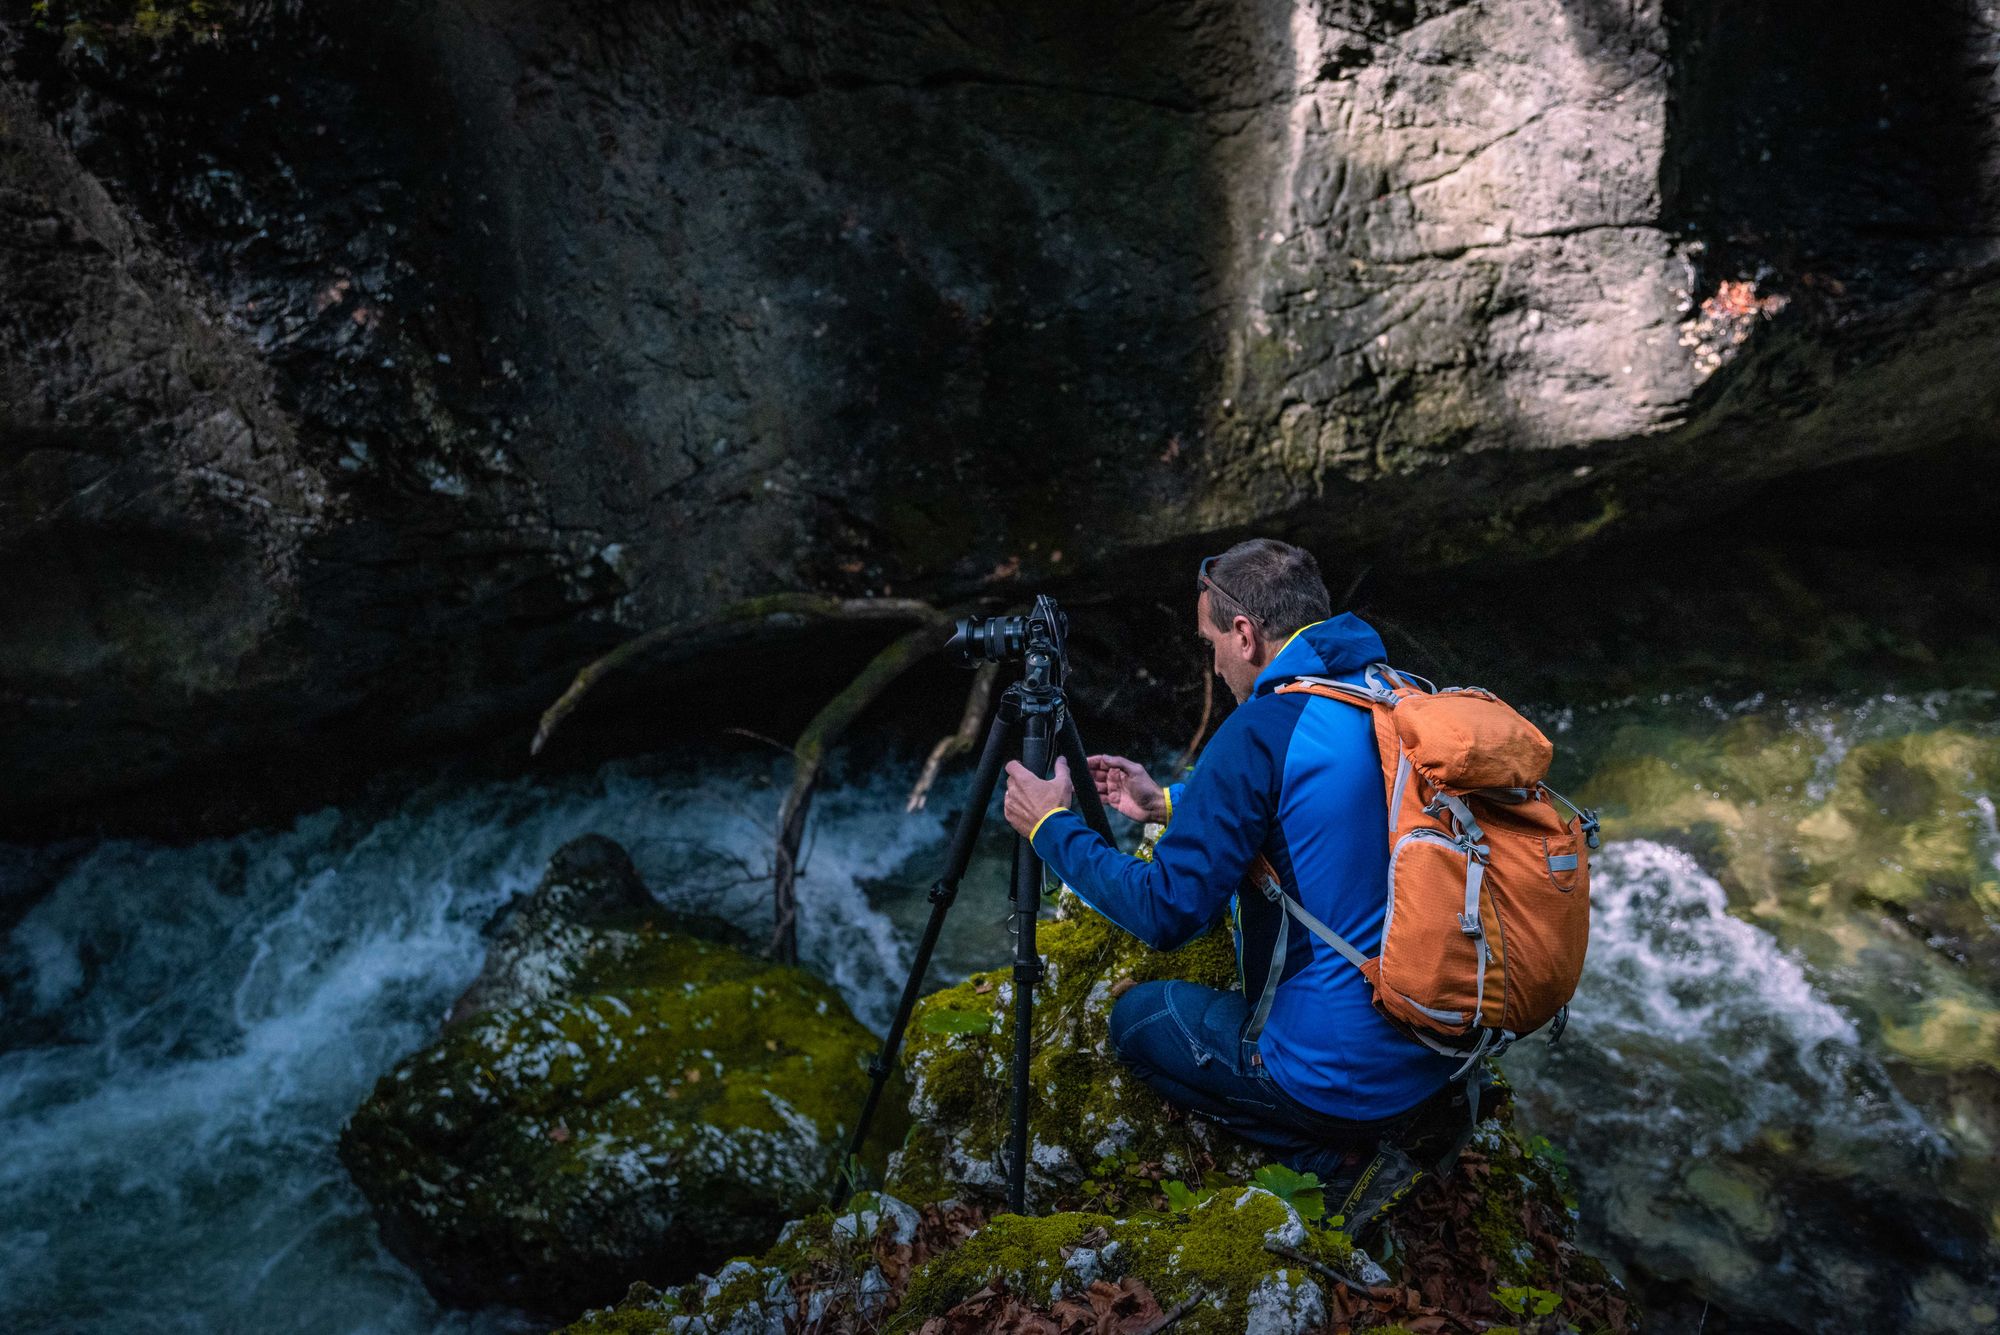 Aleš setting up a shot on a precarious looking rock in the Mostnica Gorge. Photo: Jonathan Kemeys